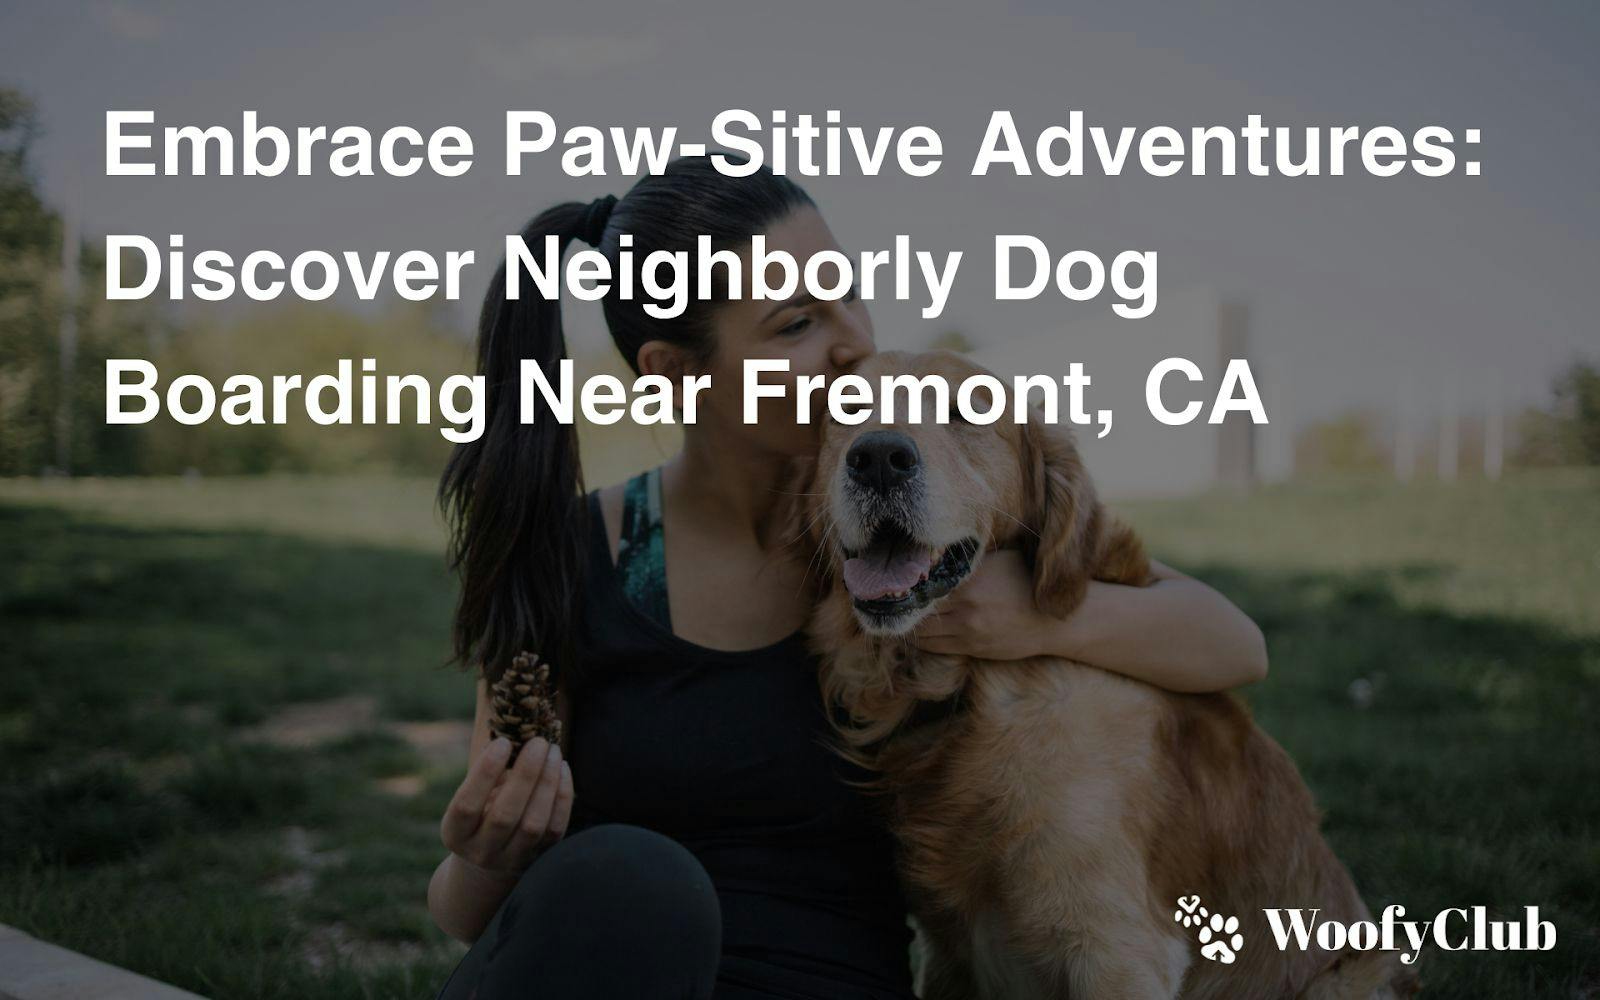 Embrace Paw-Sitive Adventures: Discover Neighborly Dog Boarding Near Fremont, CA